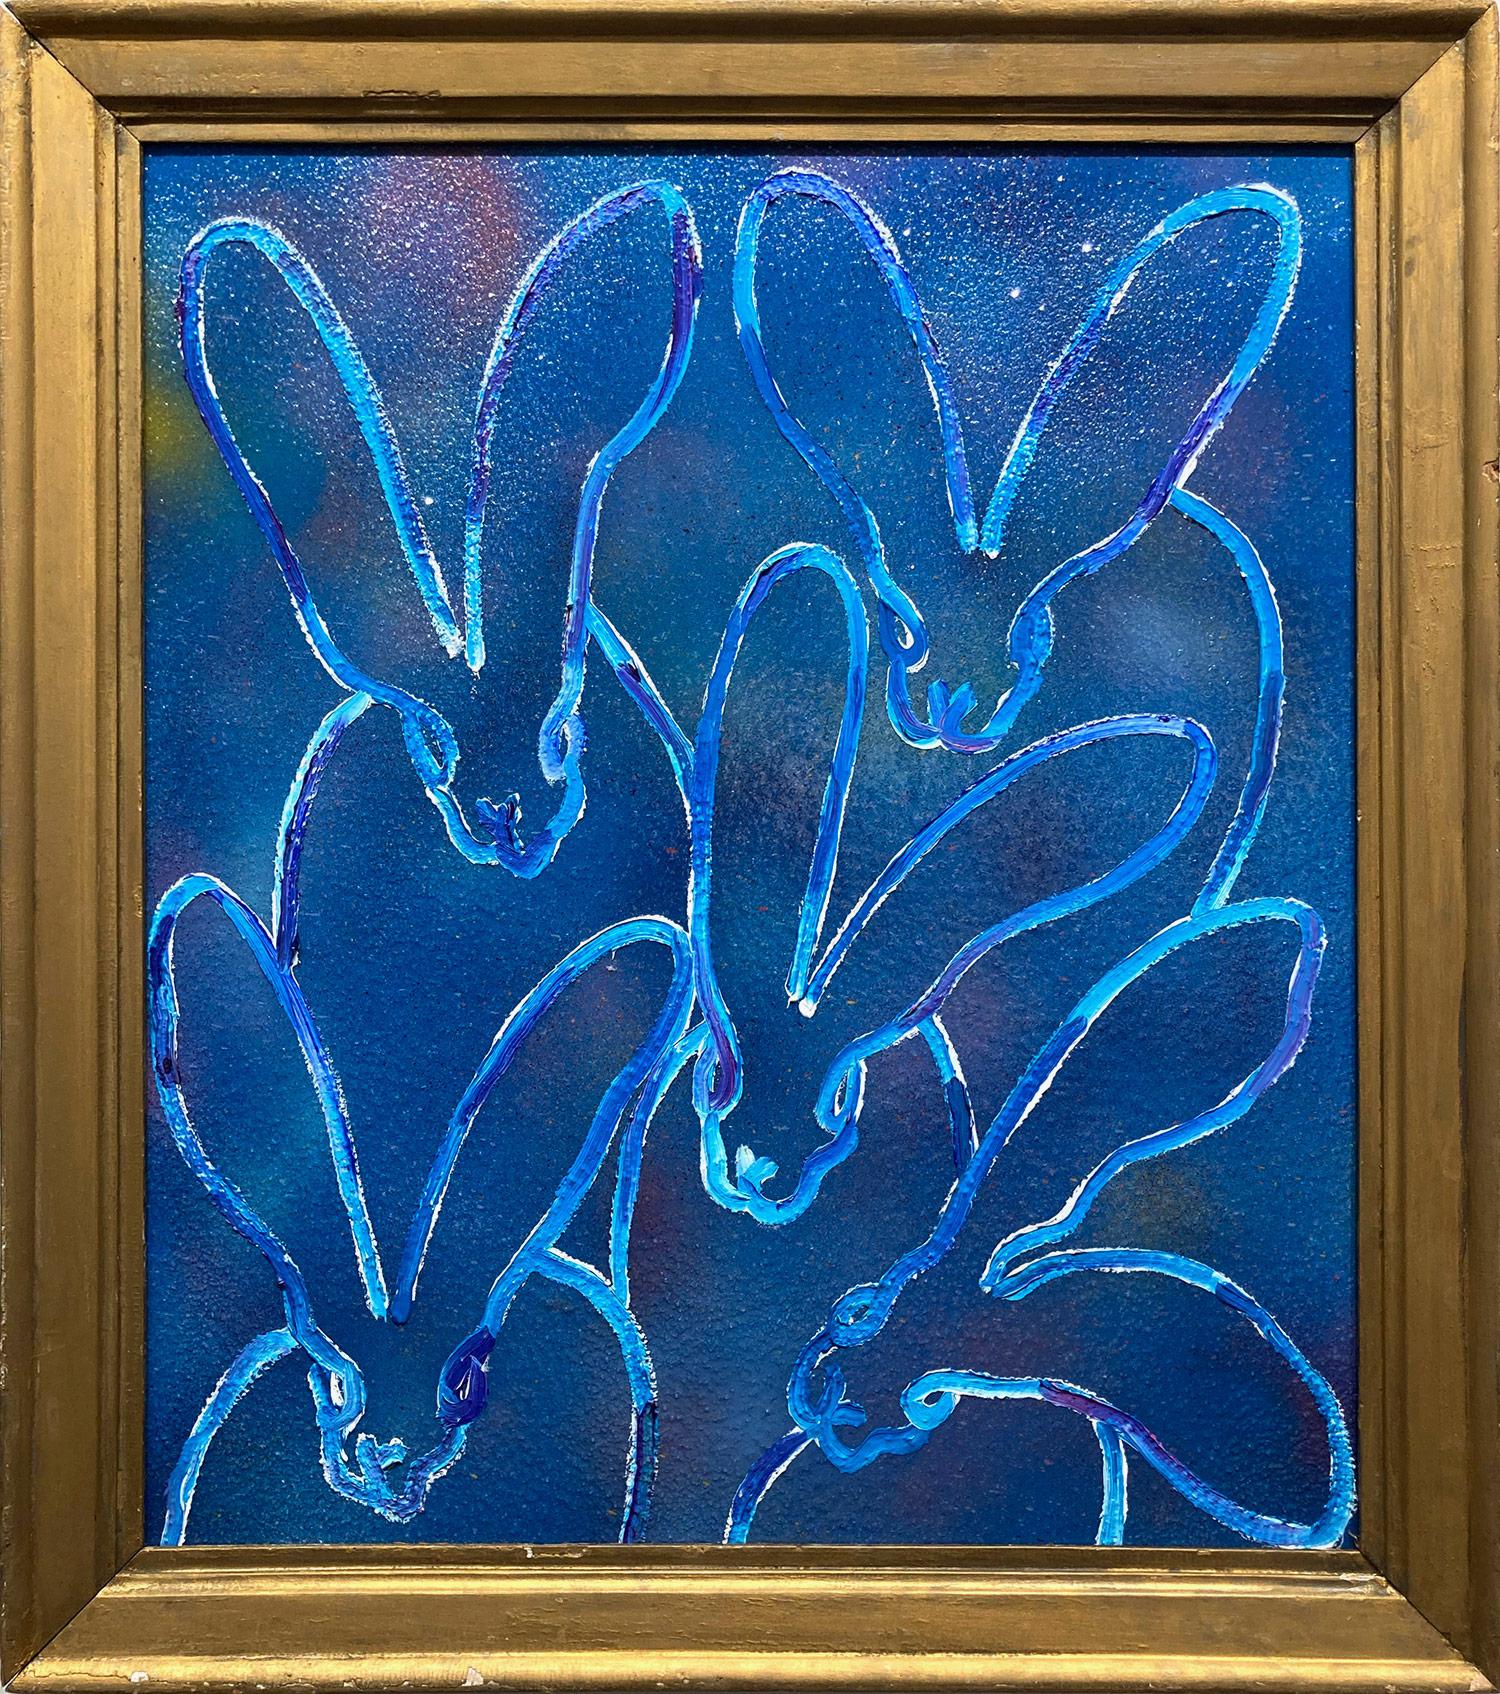 Hunt Slonem Animal Painting - "Blue Dust Hutch" White Outlined Bunnies on Blue Background Oil Painting on Wood